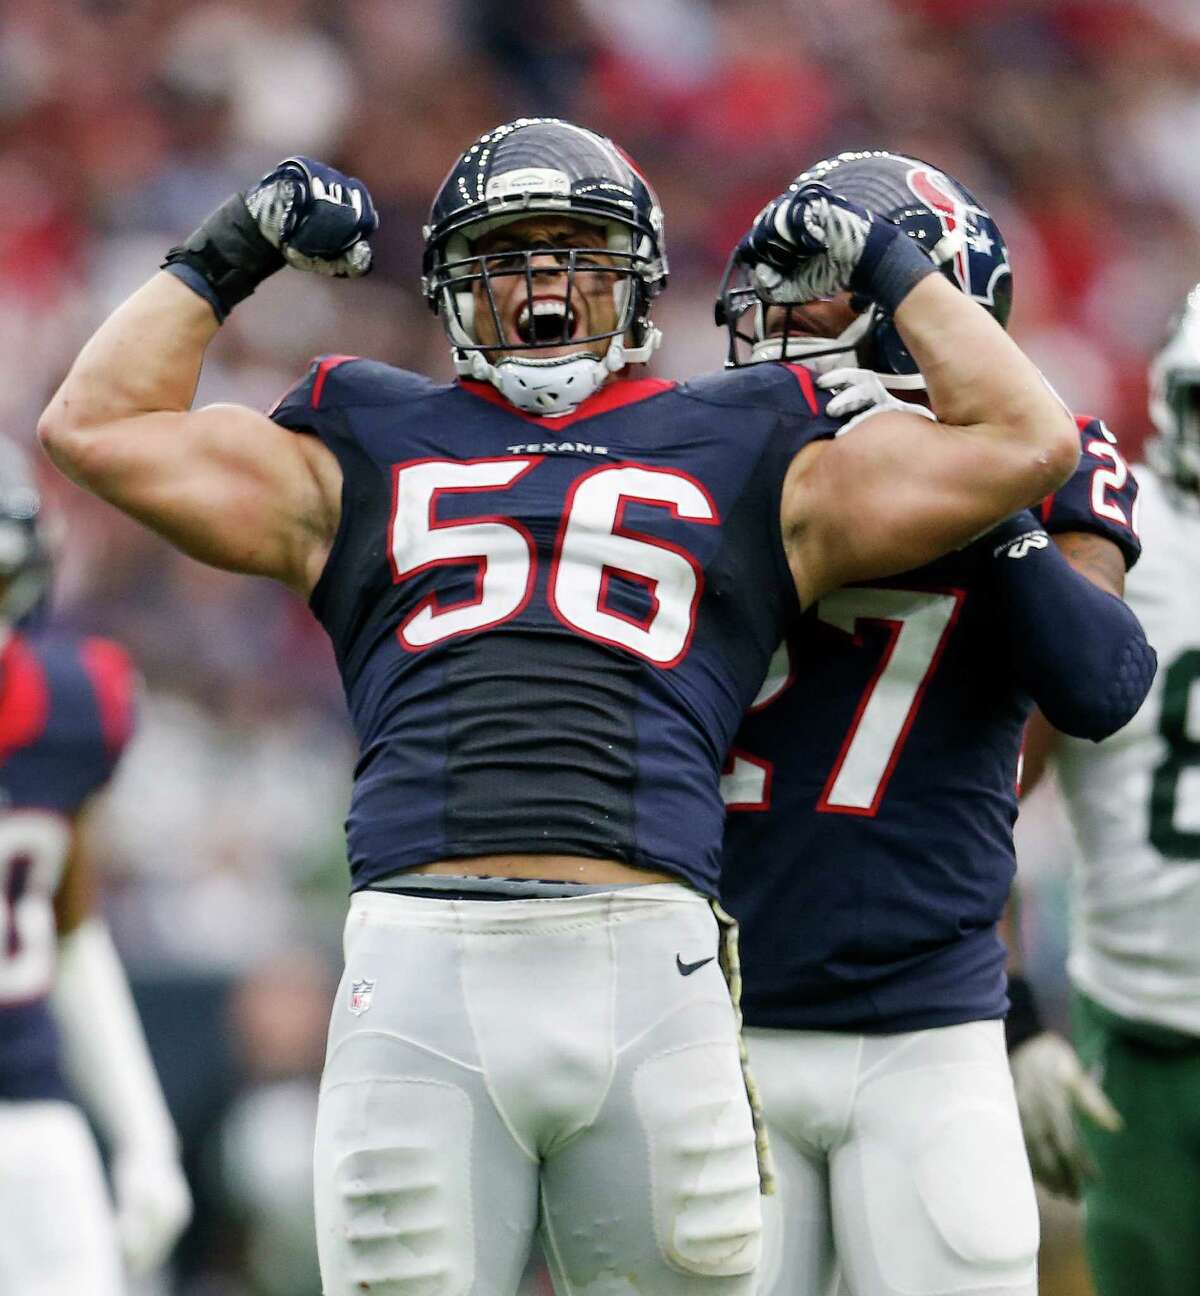 No one appreciates the chance to play in the NFL, and especially the playoffs, more than Texans linebacker Brian Cushing, who twice had seasons cut short by knee injuries.